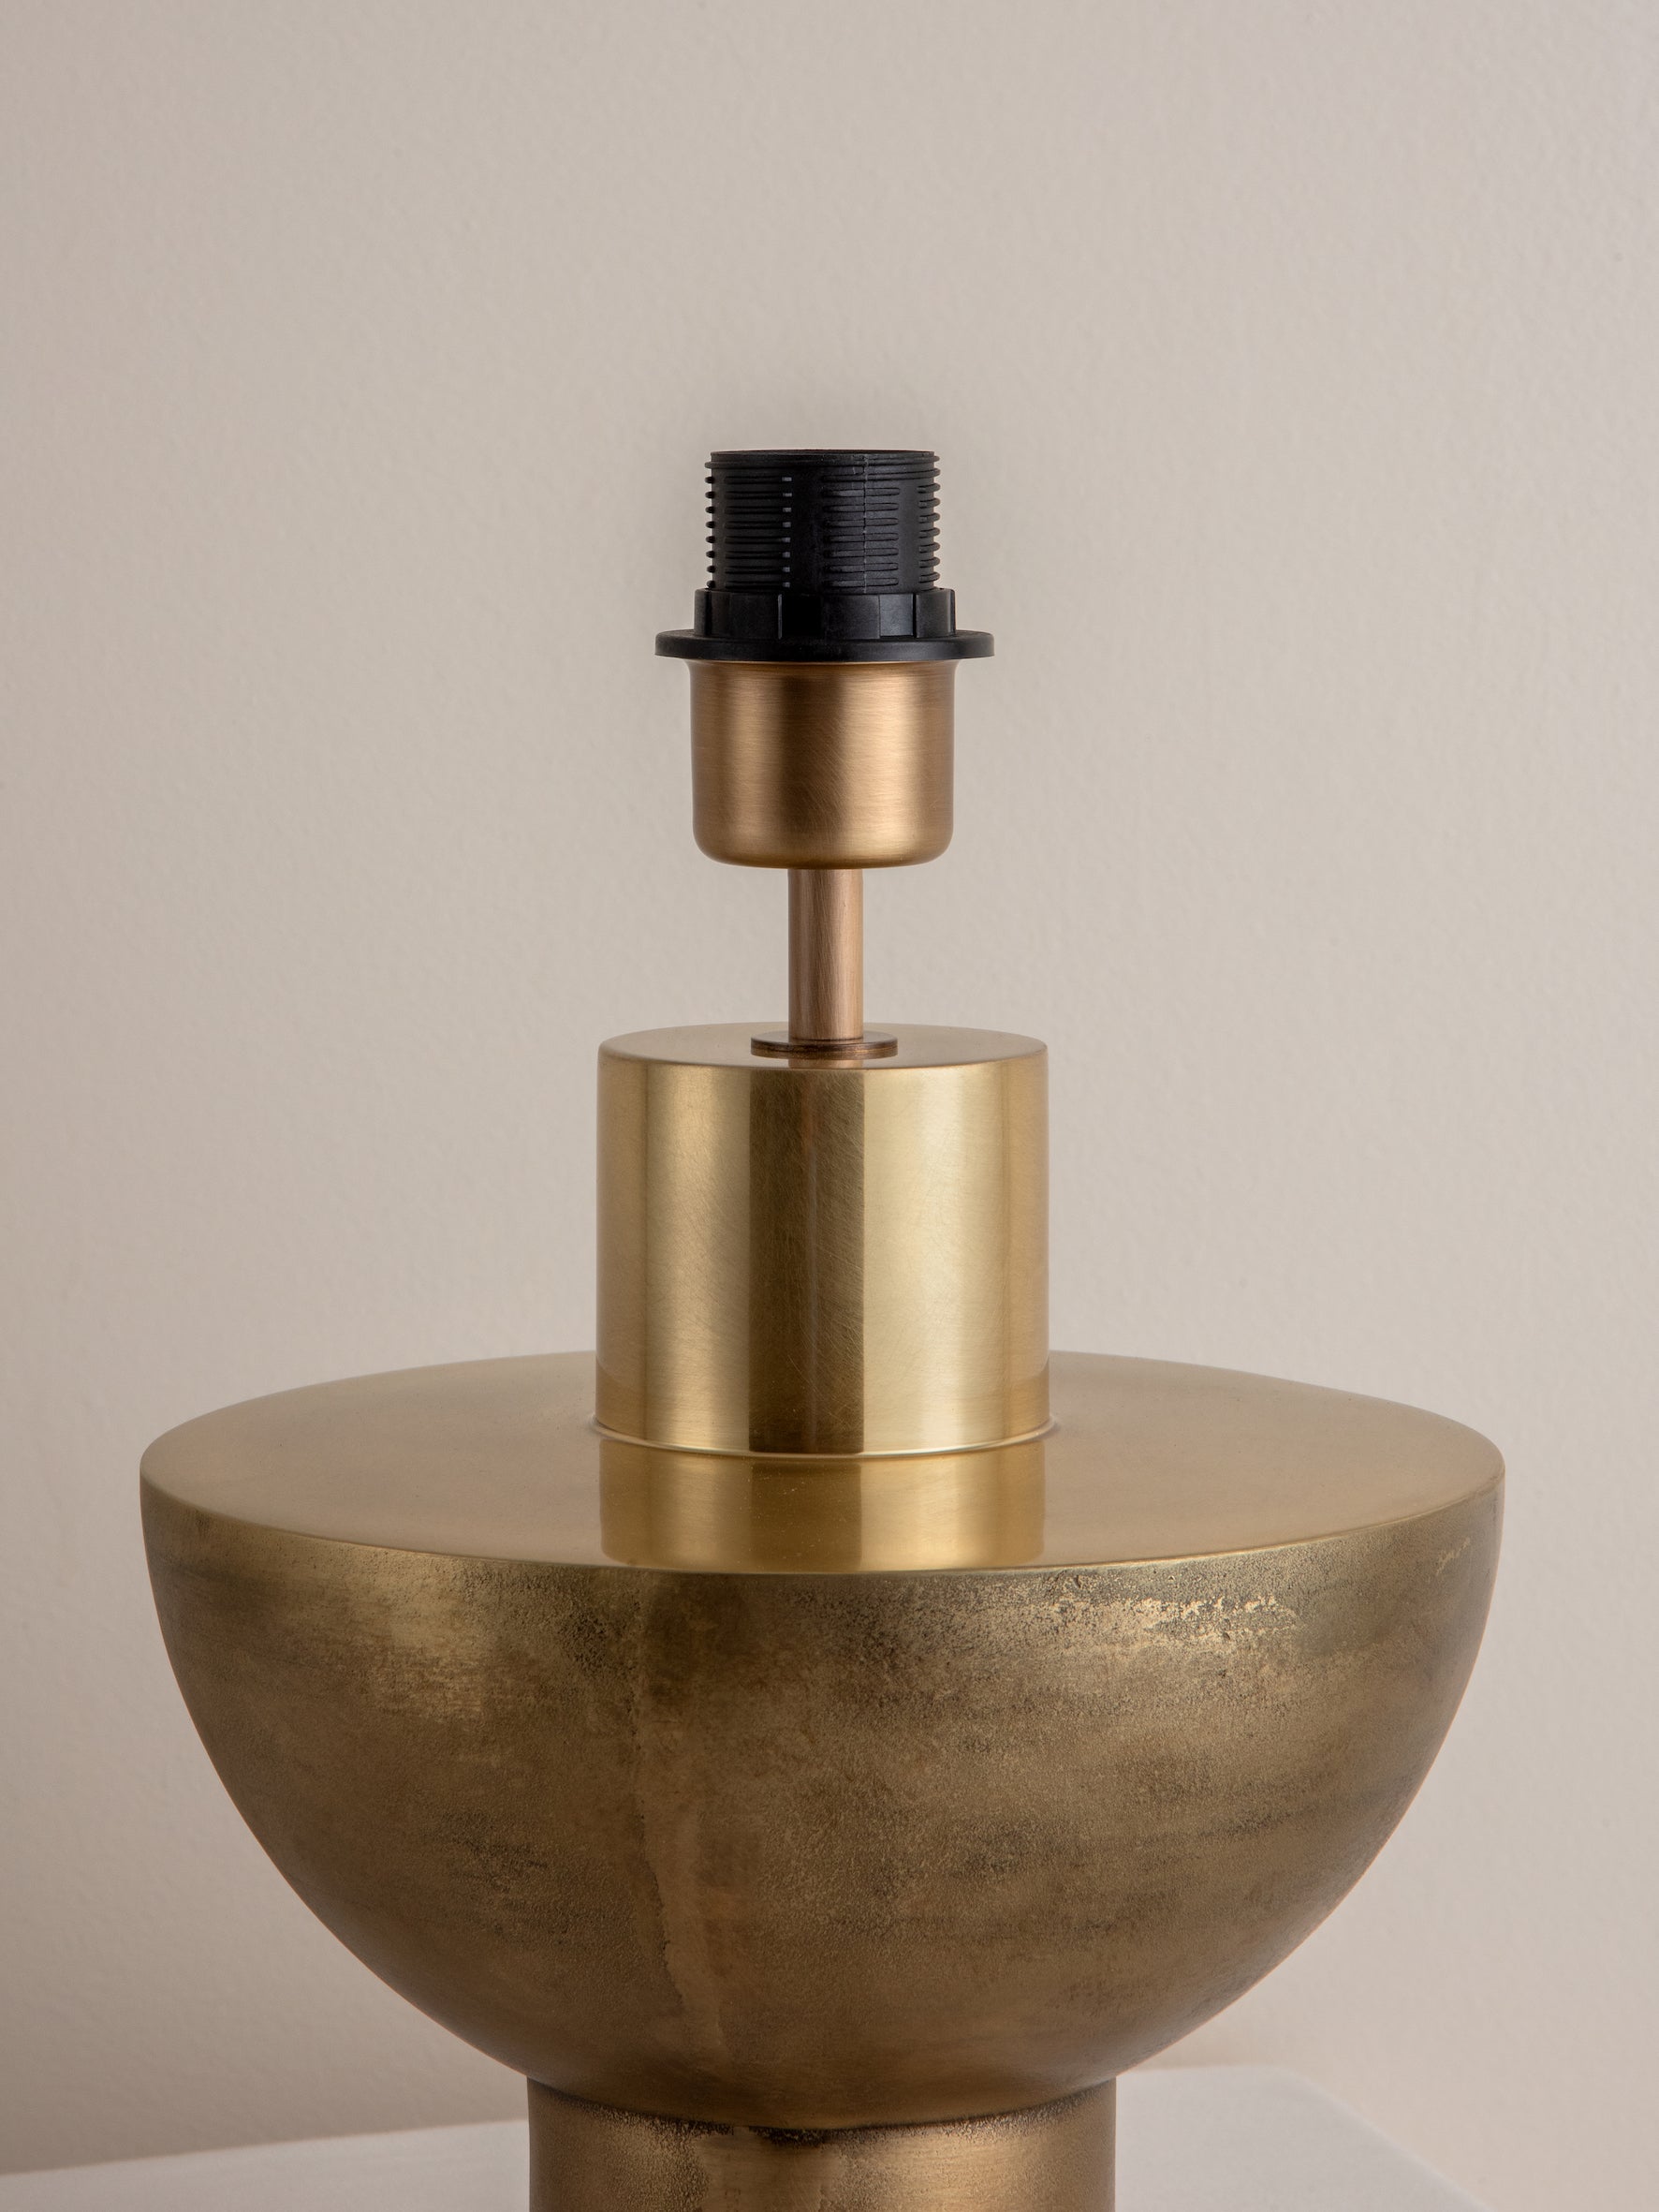 Editions brass lamp with + chrome shade | Table Lamp | Lights & Lamps | UK | Modern Affordable Designer Lighting